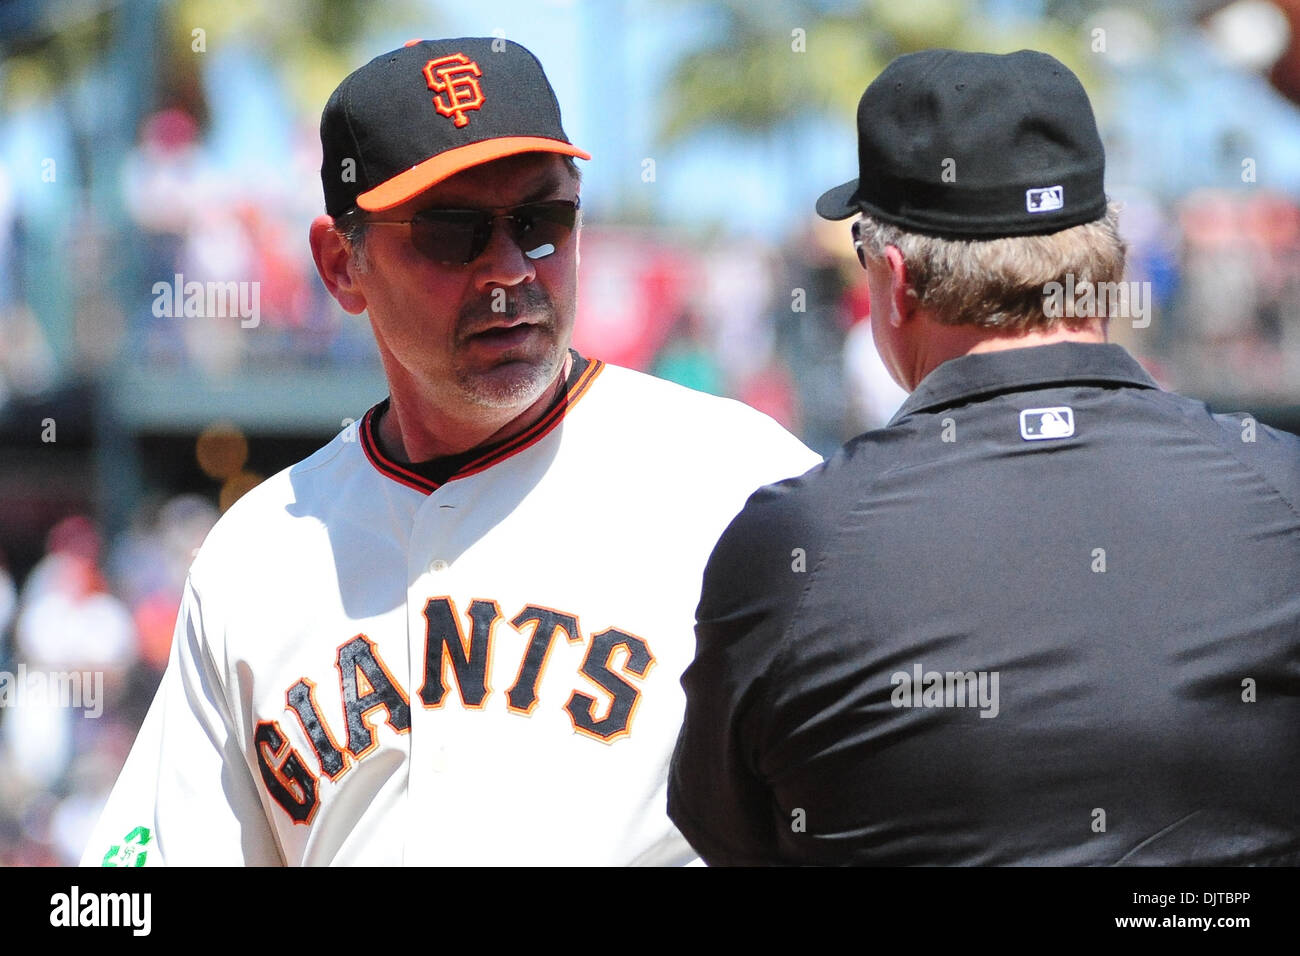 Former Padres, Giants manager Bochy to manage French team